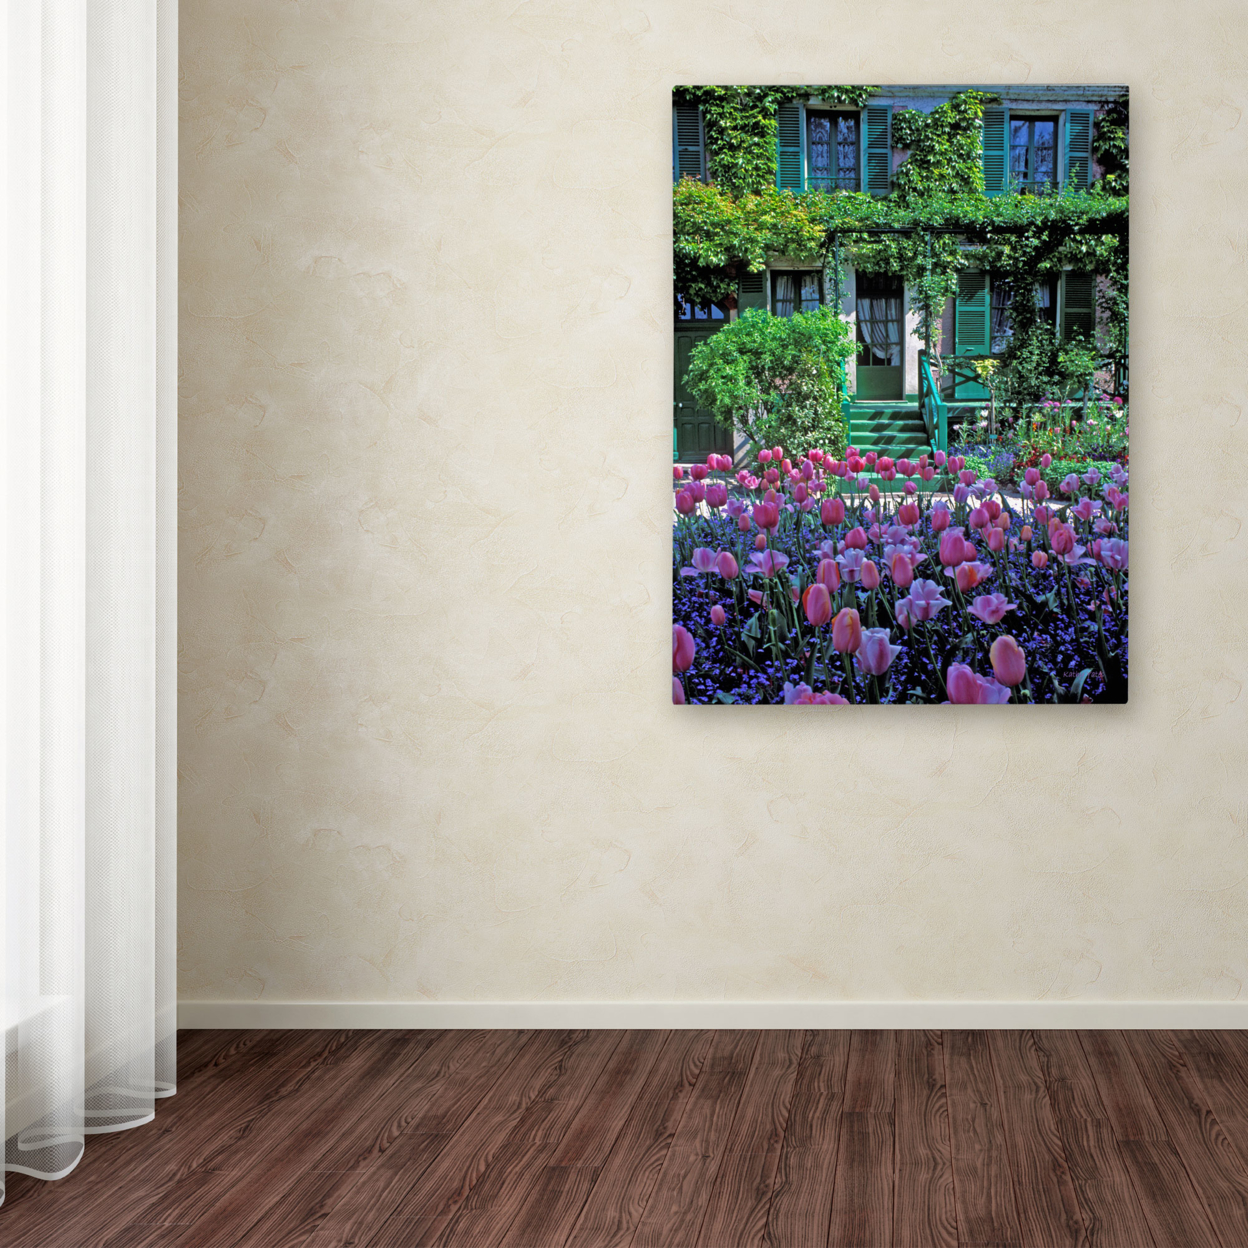 Kathy Yates 'Monet's House With Tulips' Canvas Wall Art 35 X 47 Inches